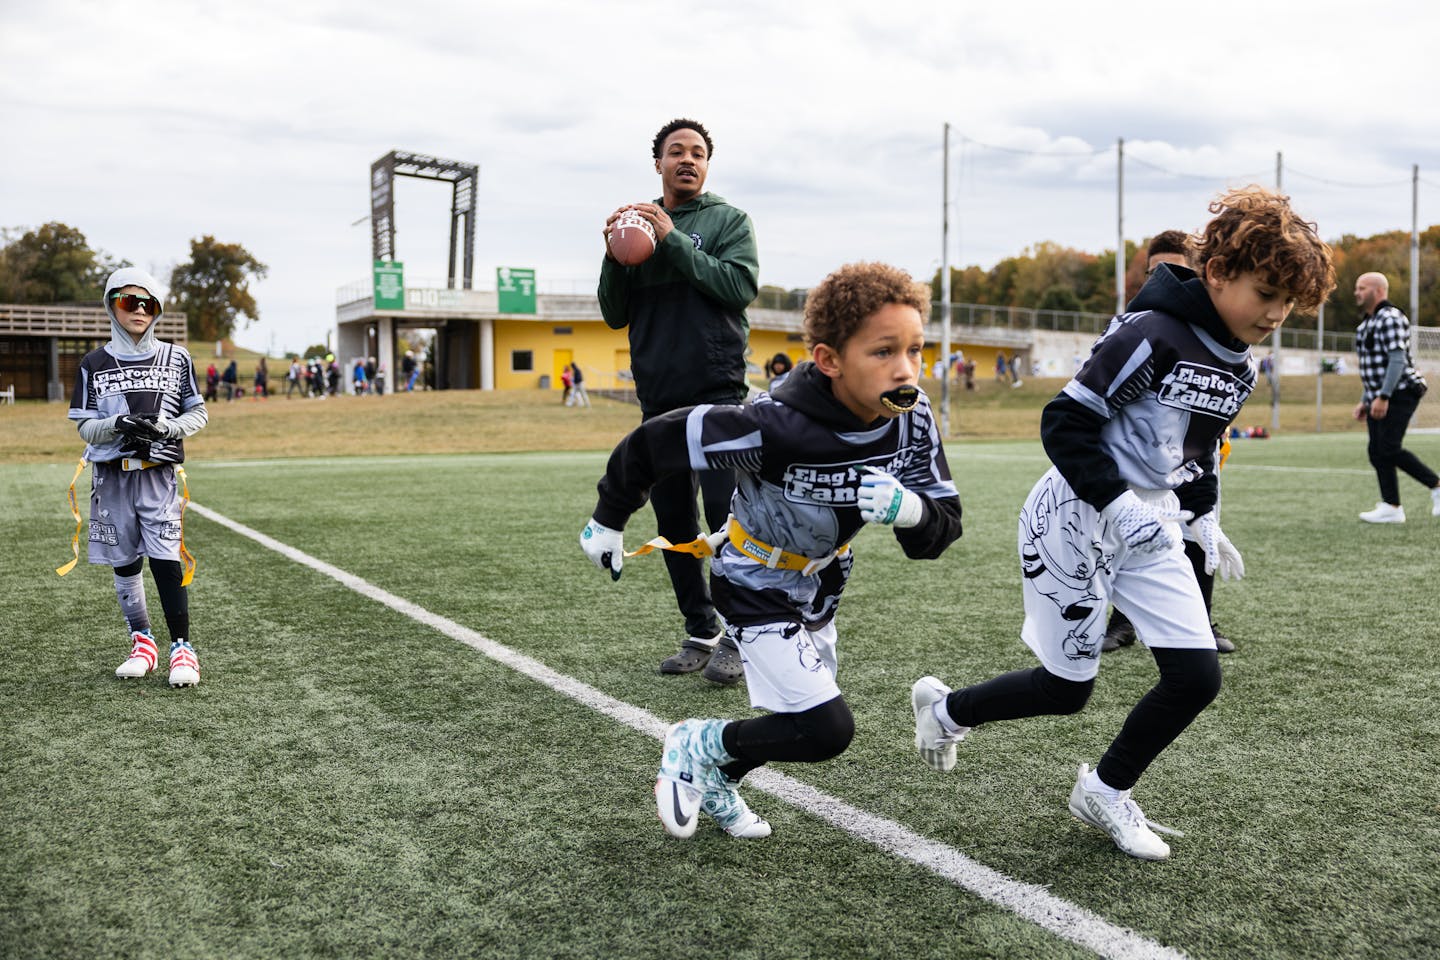 Could flag football one day leapfrog tackle football in popularity? - The  Bradenton Times